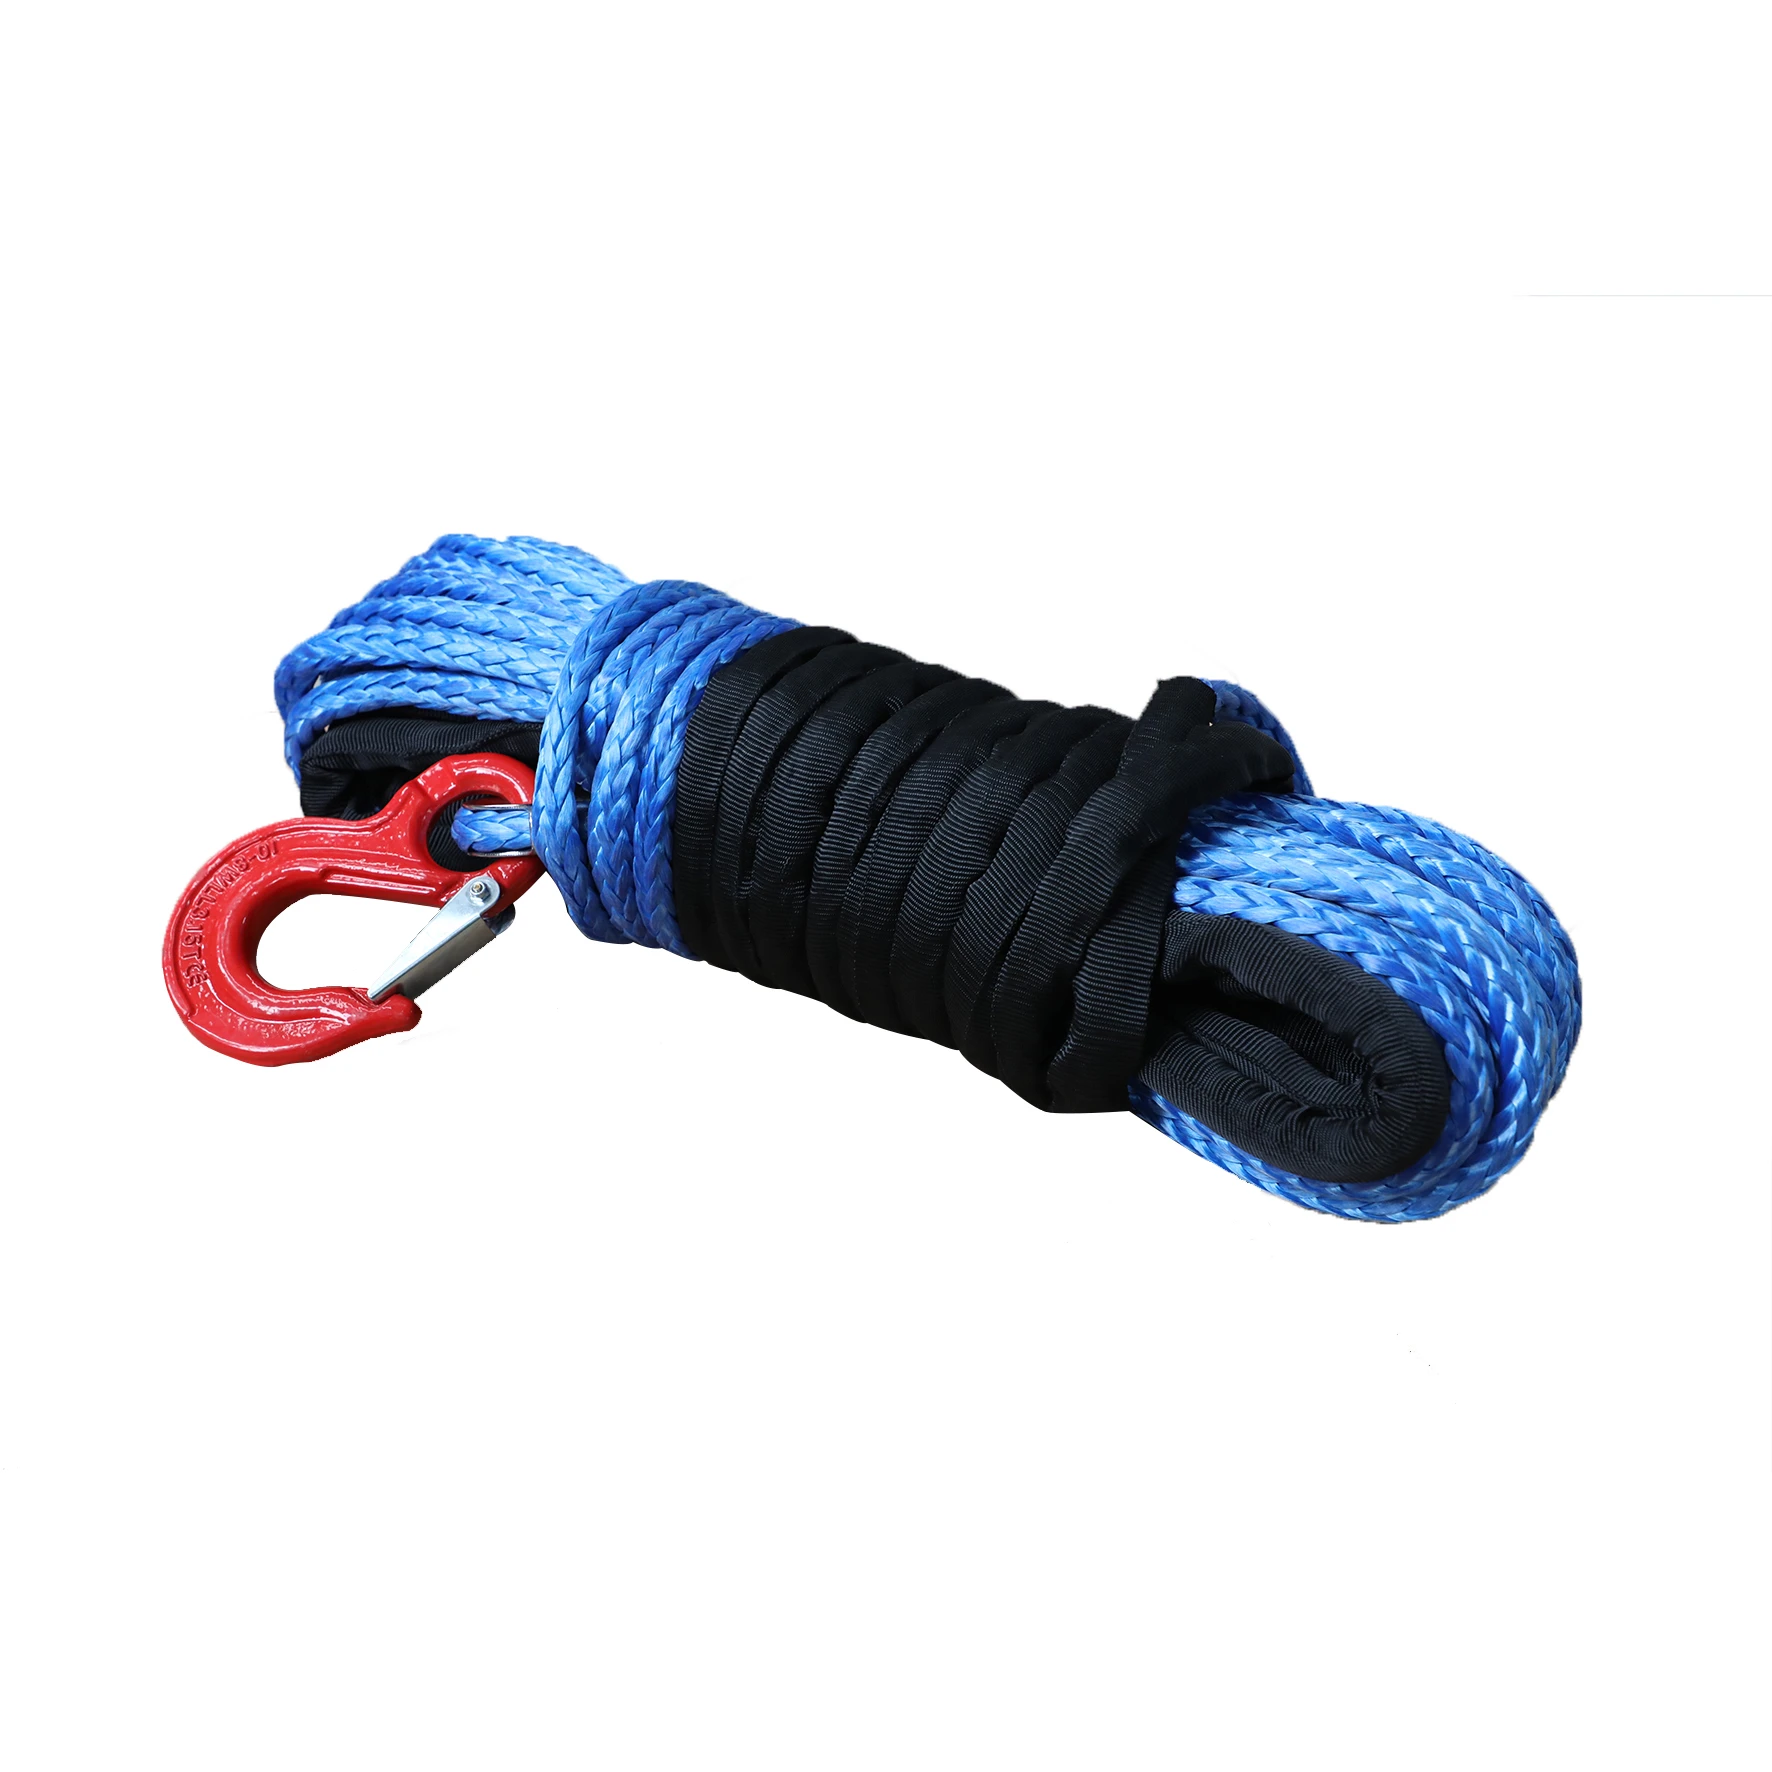 12 strand synthetic  winch rope UHMWPE winch with all kind accessories for ATV/UTV/SUV 4X4 offroad